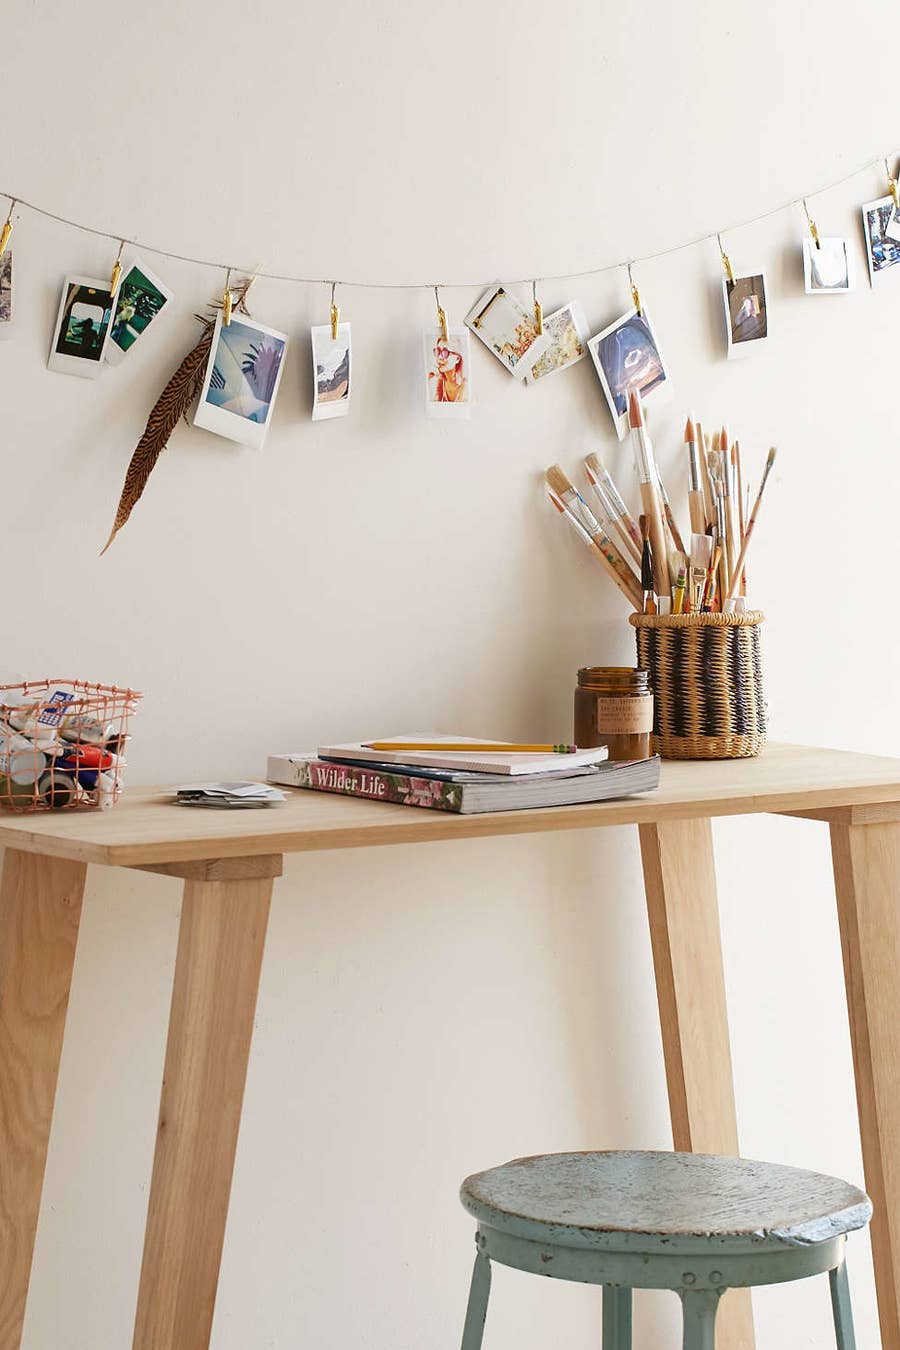 DIY cubicle decorations which bring your personal touch, energy